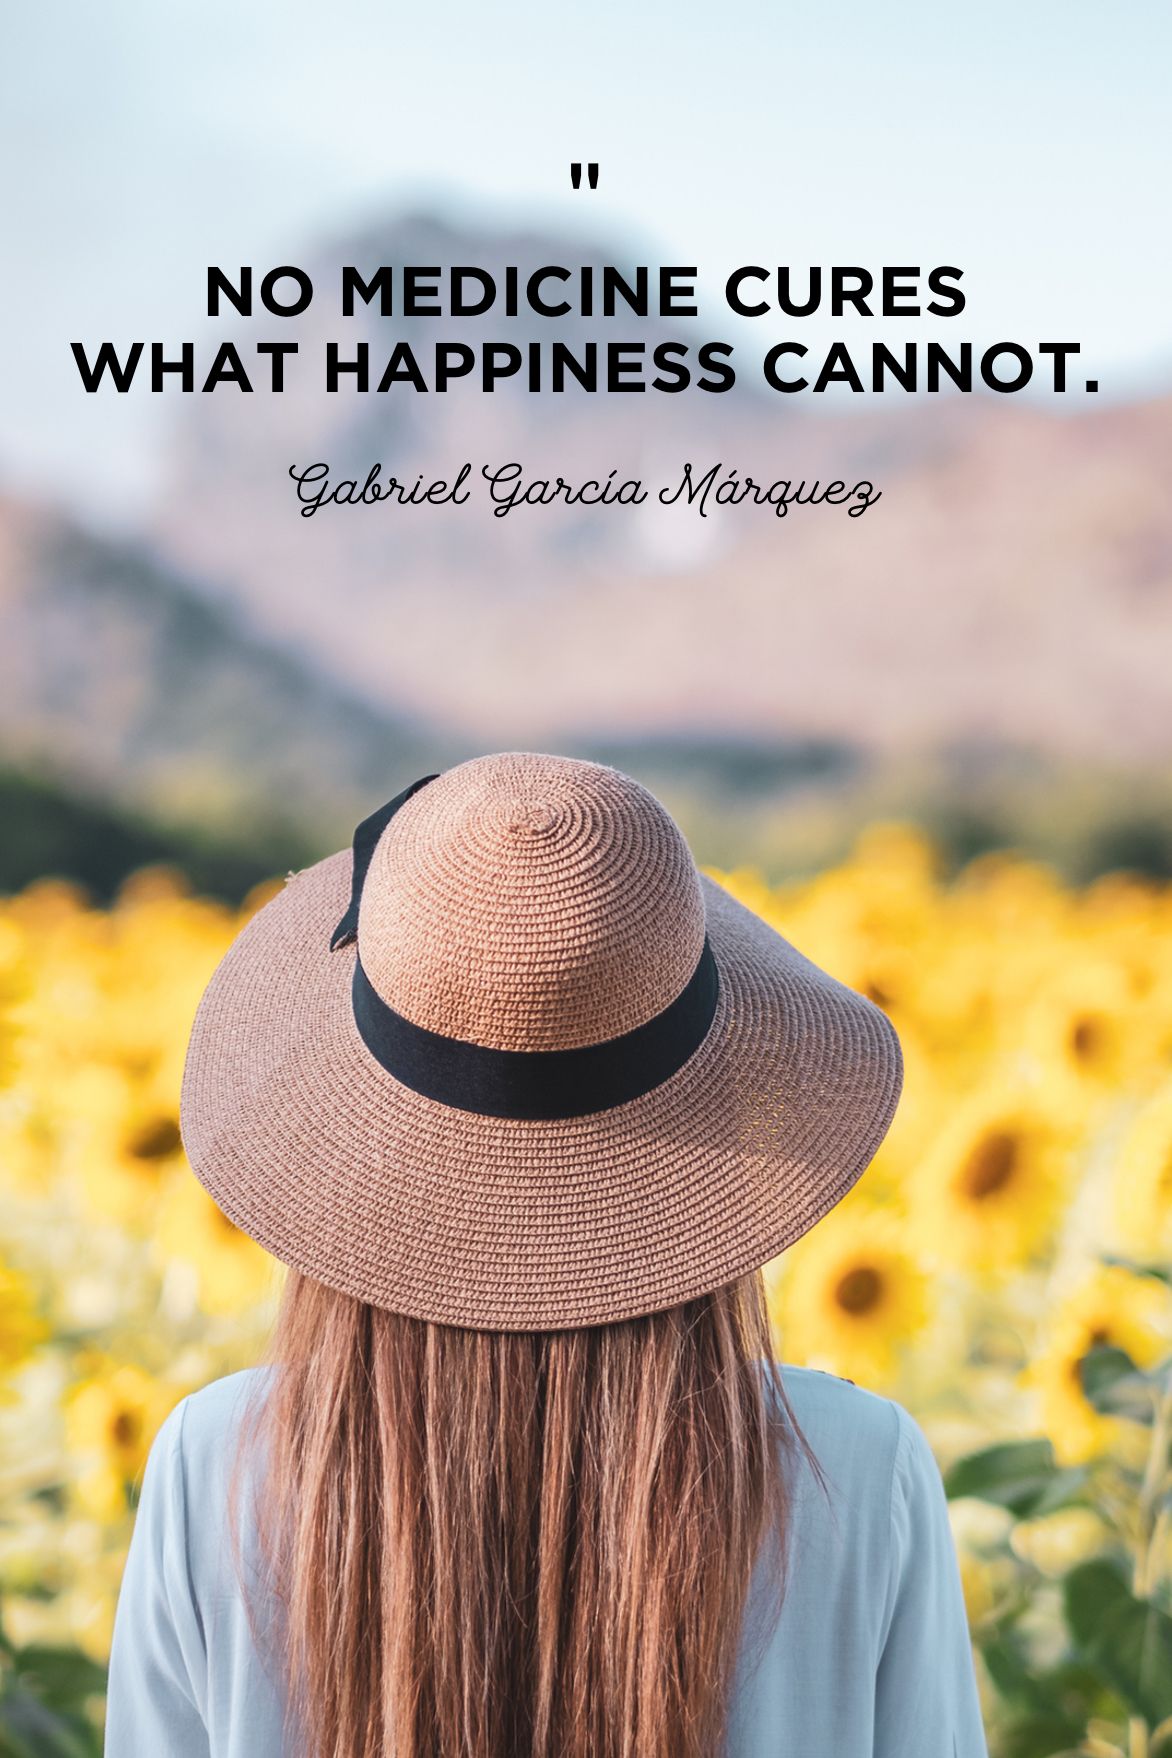 34 Best Happy Quotes - Quotes to Make You Happy